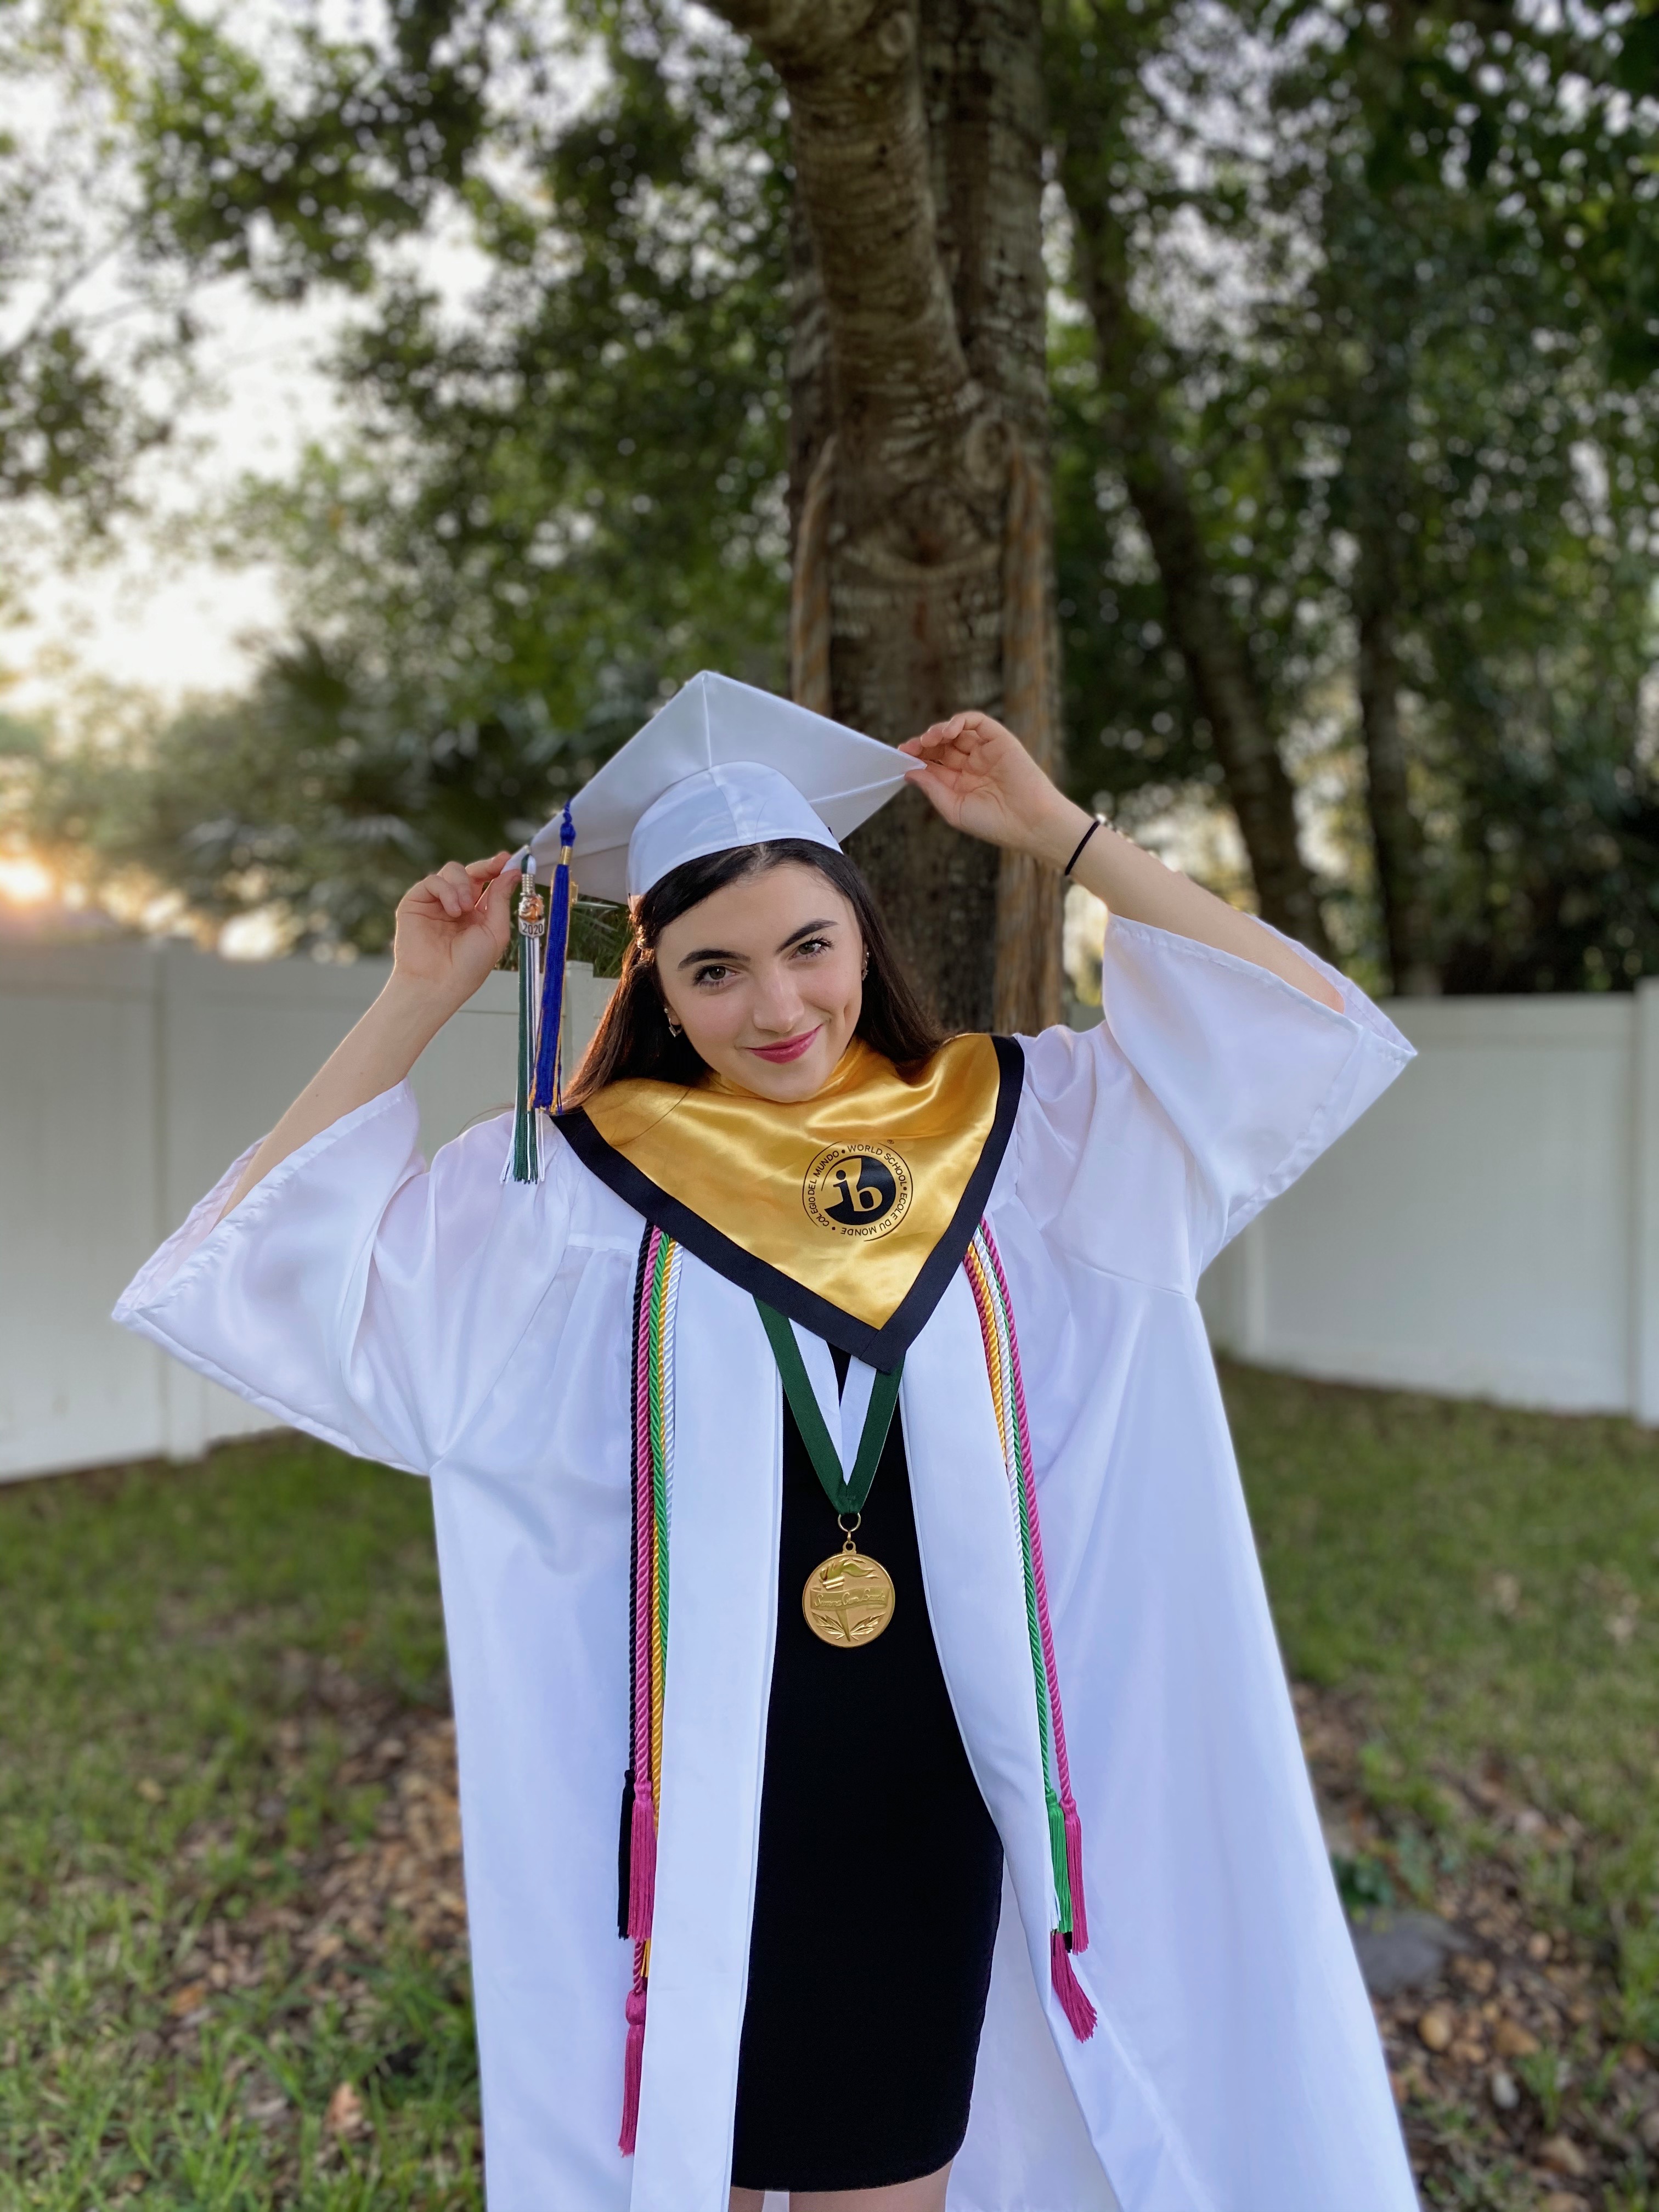 Isabella Scarcella will graduate from high school in a ceremony at the Daytona International Speedway in Florida on May 31, 2020. (Courtesy of Isabella Scarcella)